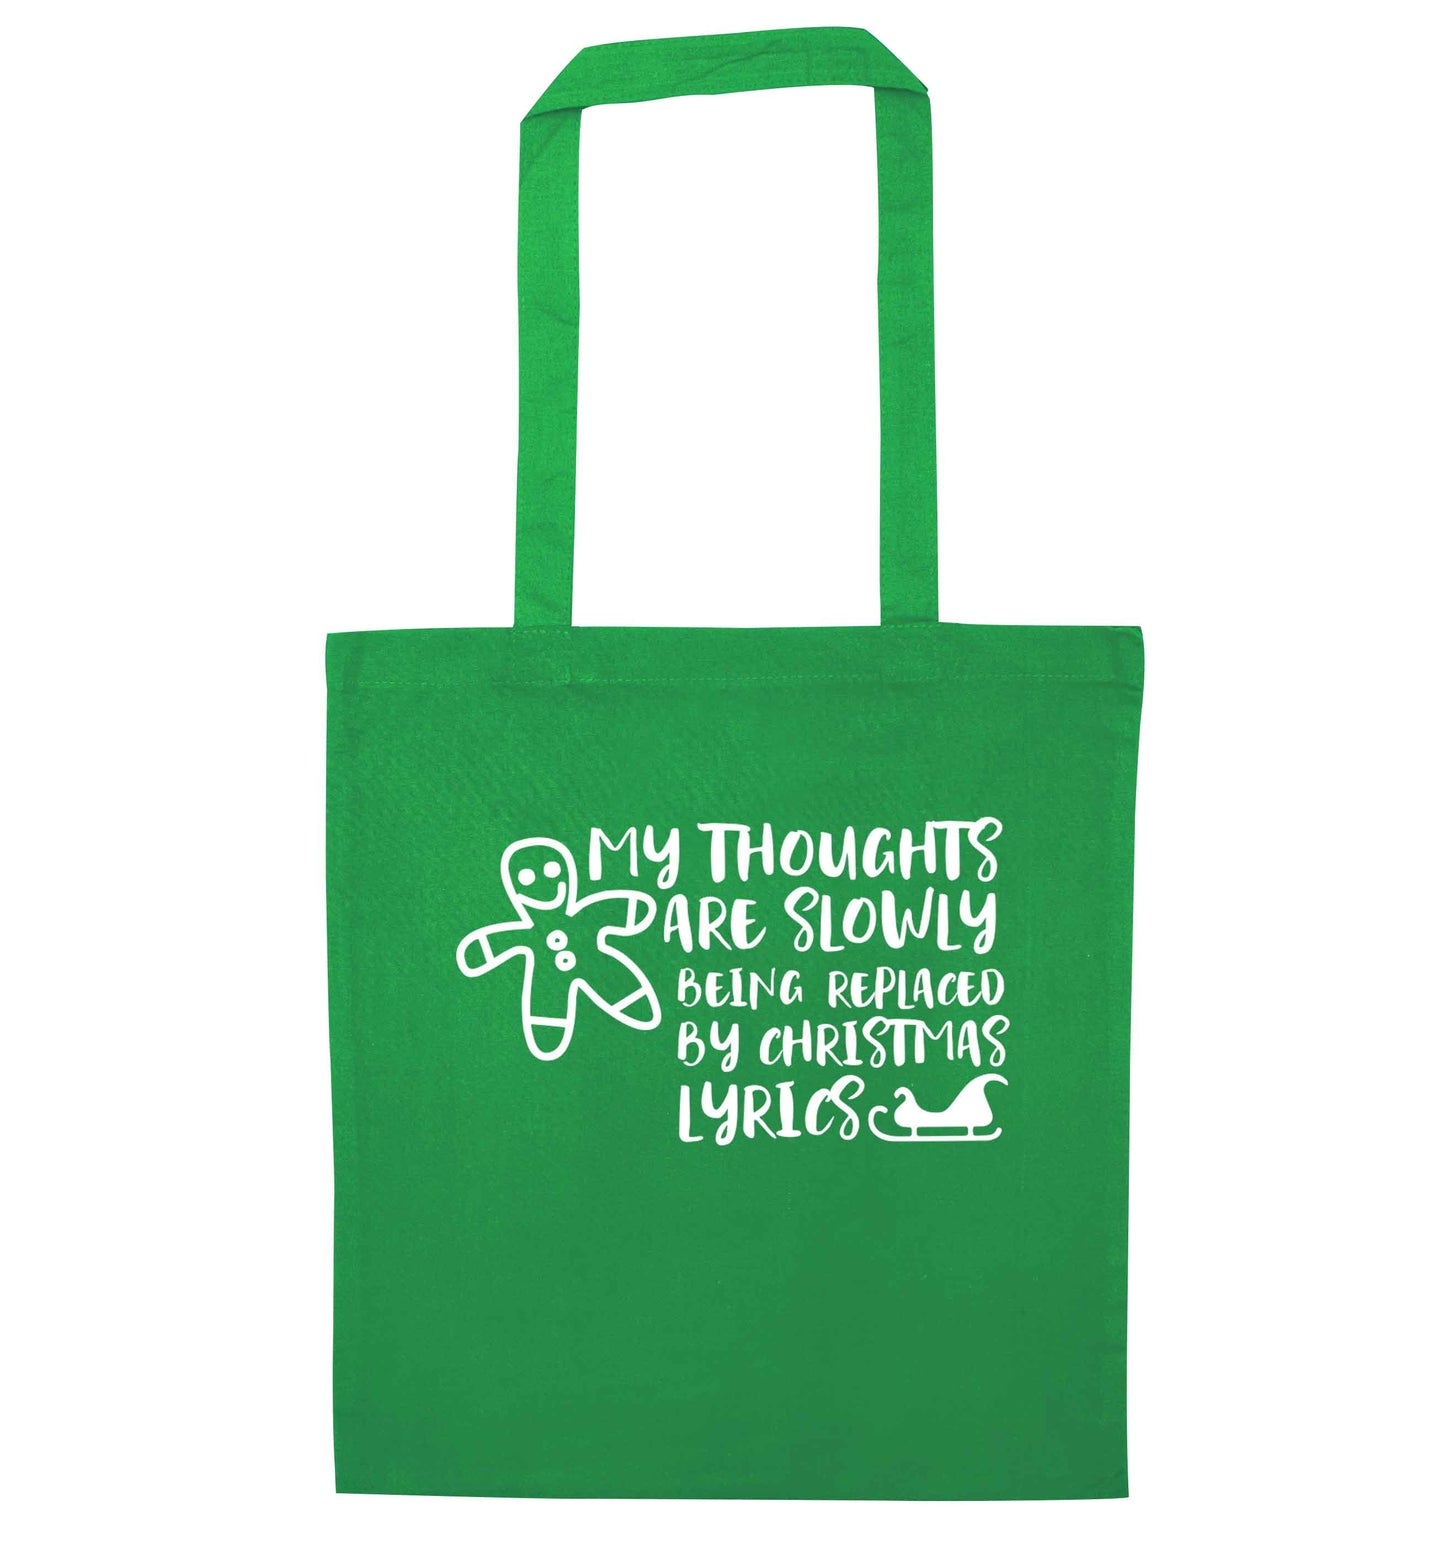 My thoughts are slowly being replaced by Christmas lyrics green tote bag